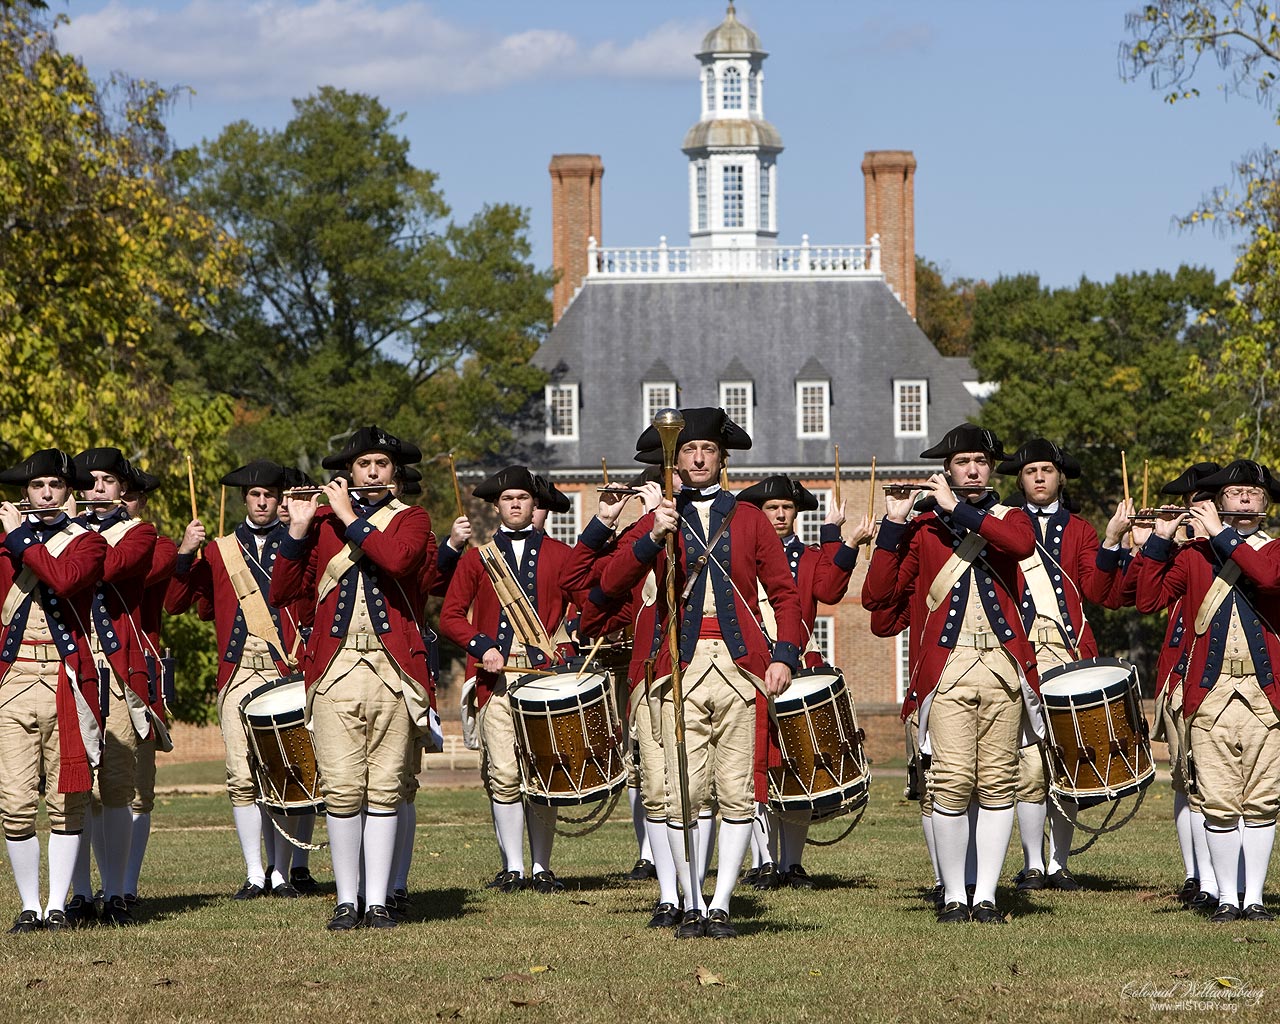 Fife & Drum Corps with Lance.jpg